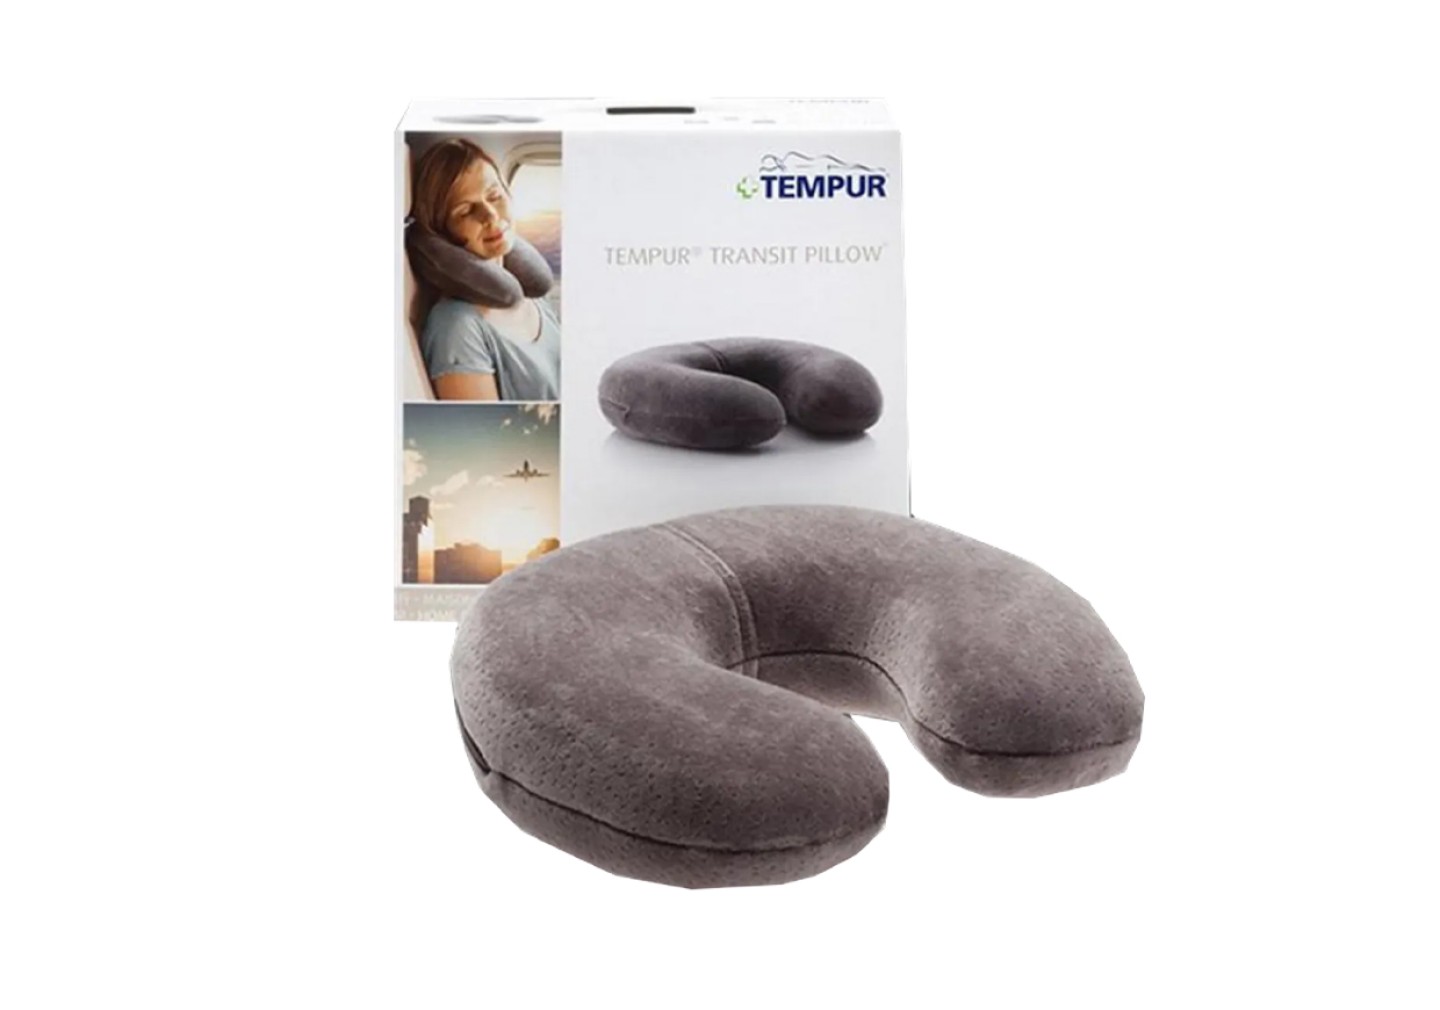 THE TRANSIT PILLOW by Tempur